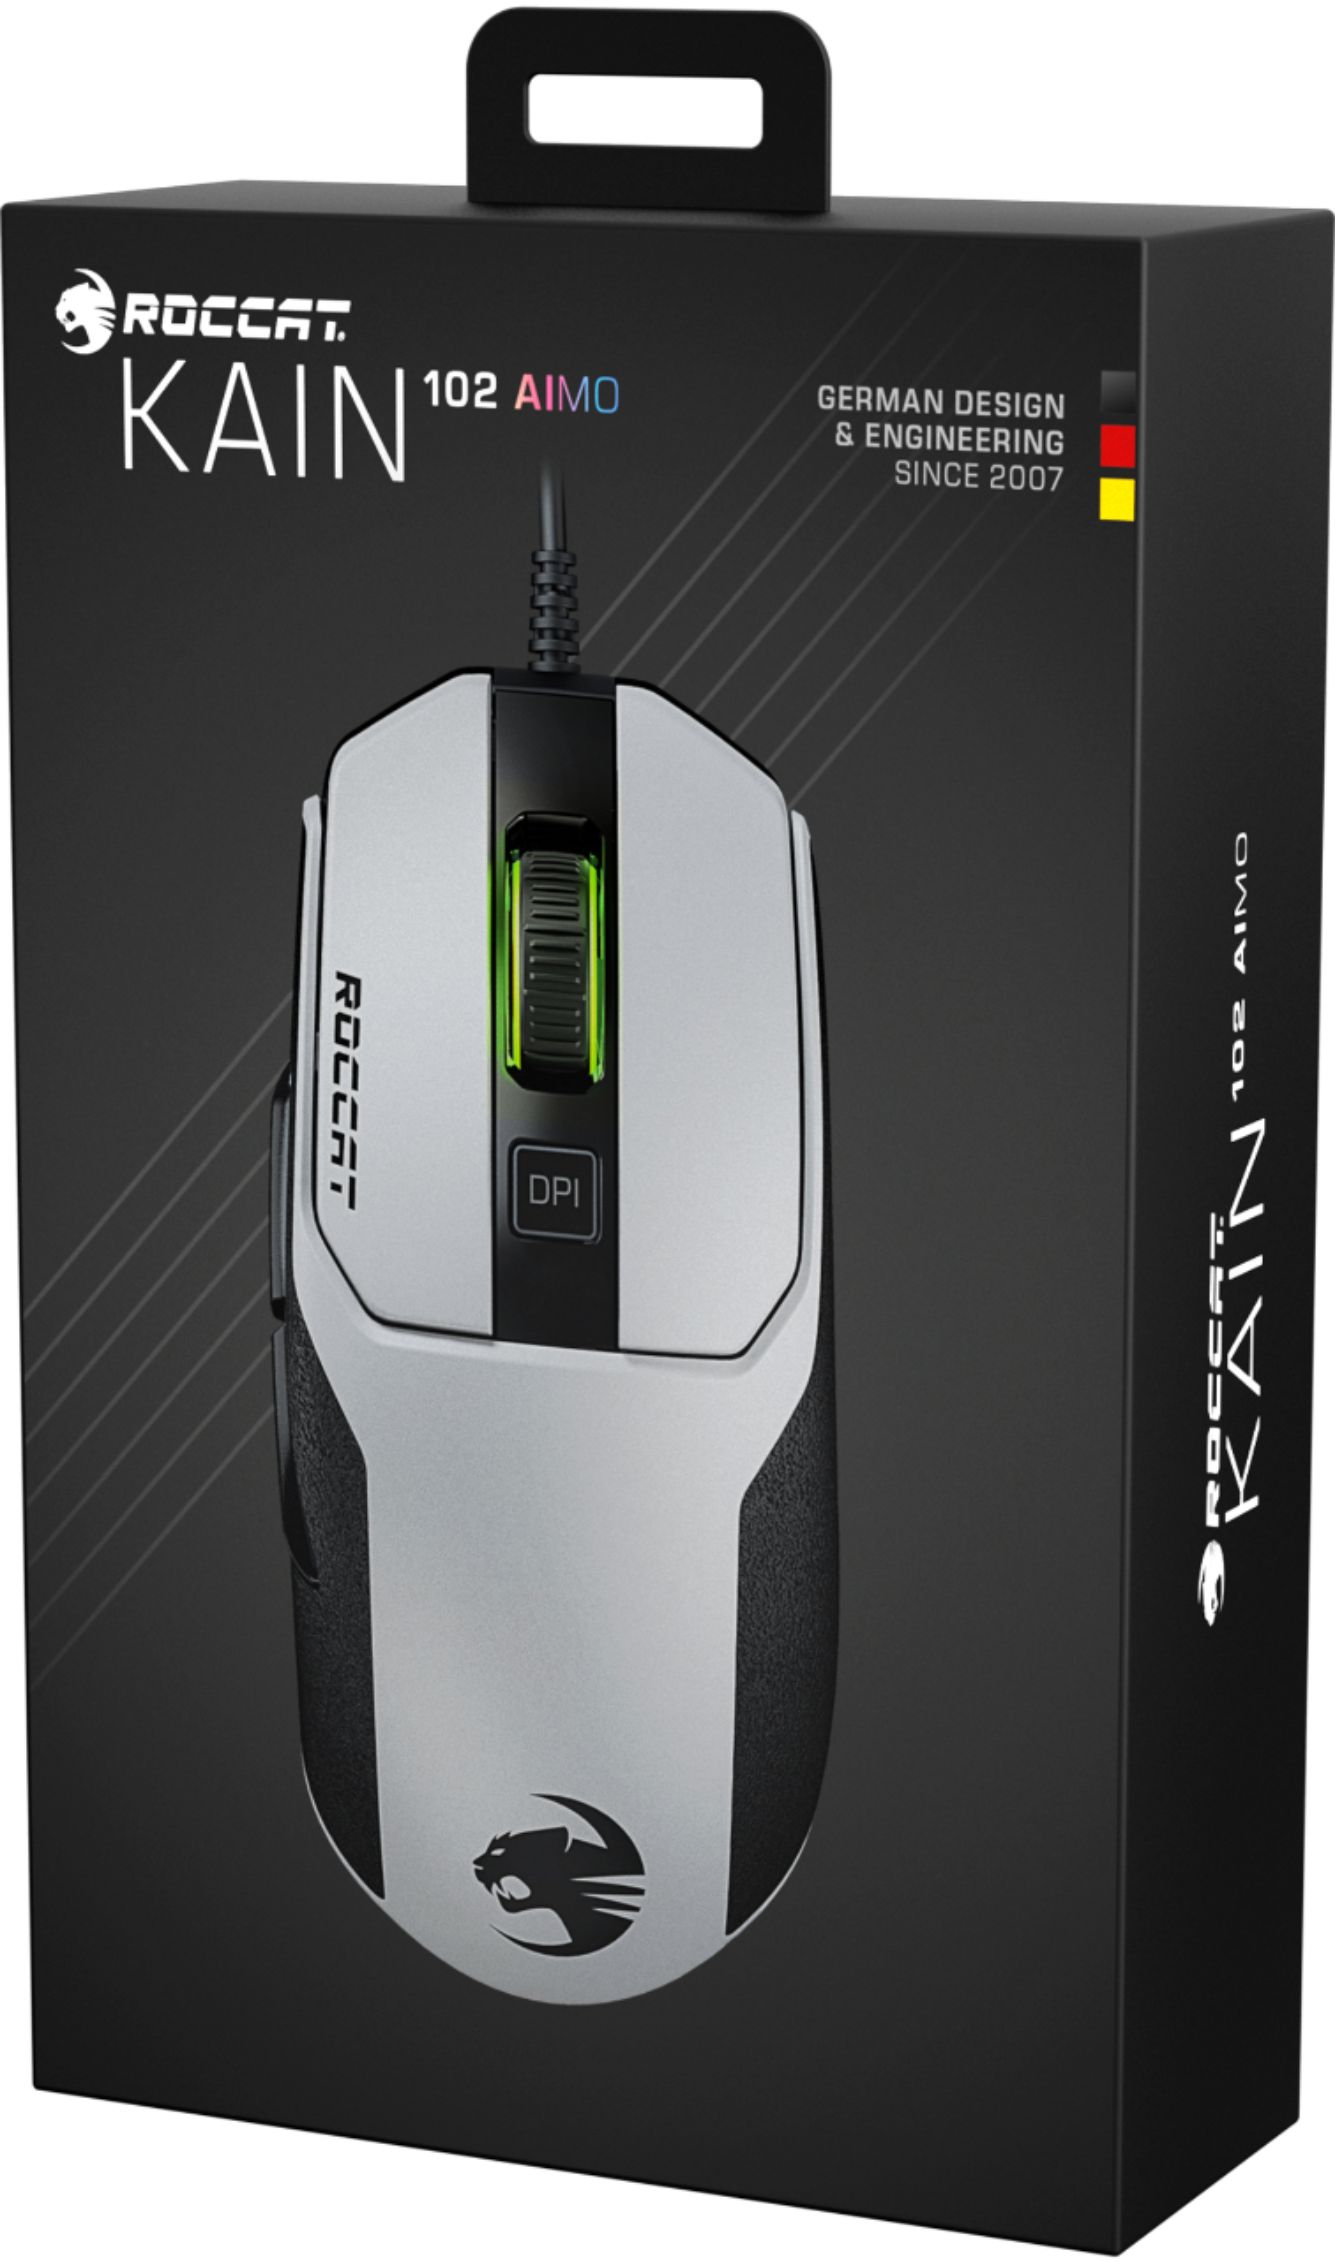 Roccat Kain 100 Aimo Software Download Roccat Kain 100 Aimo Software